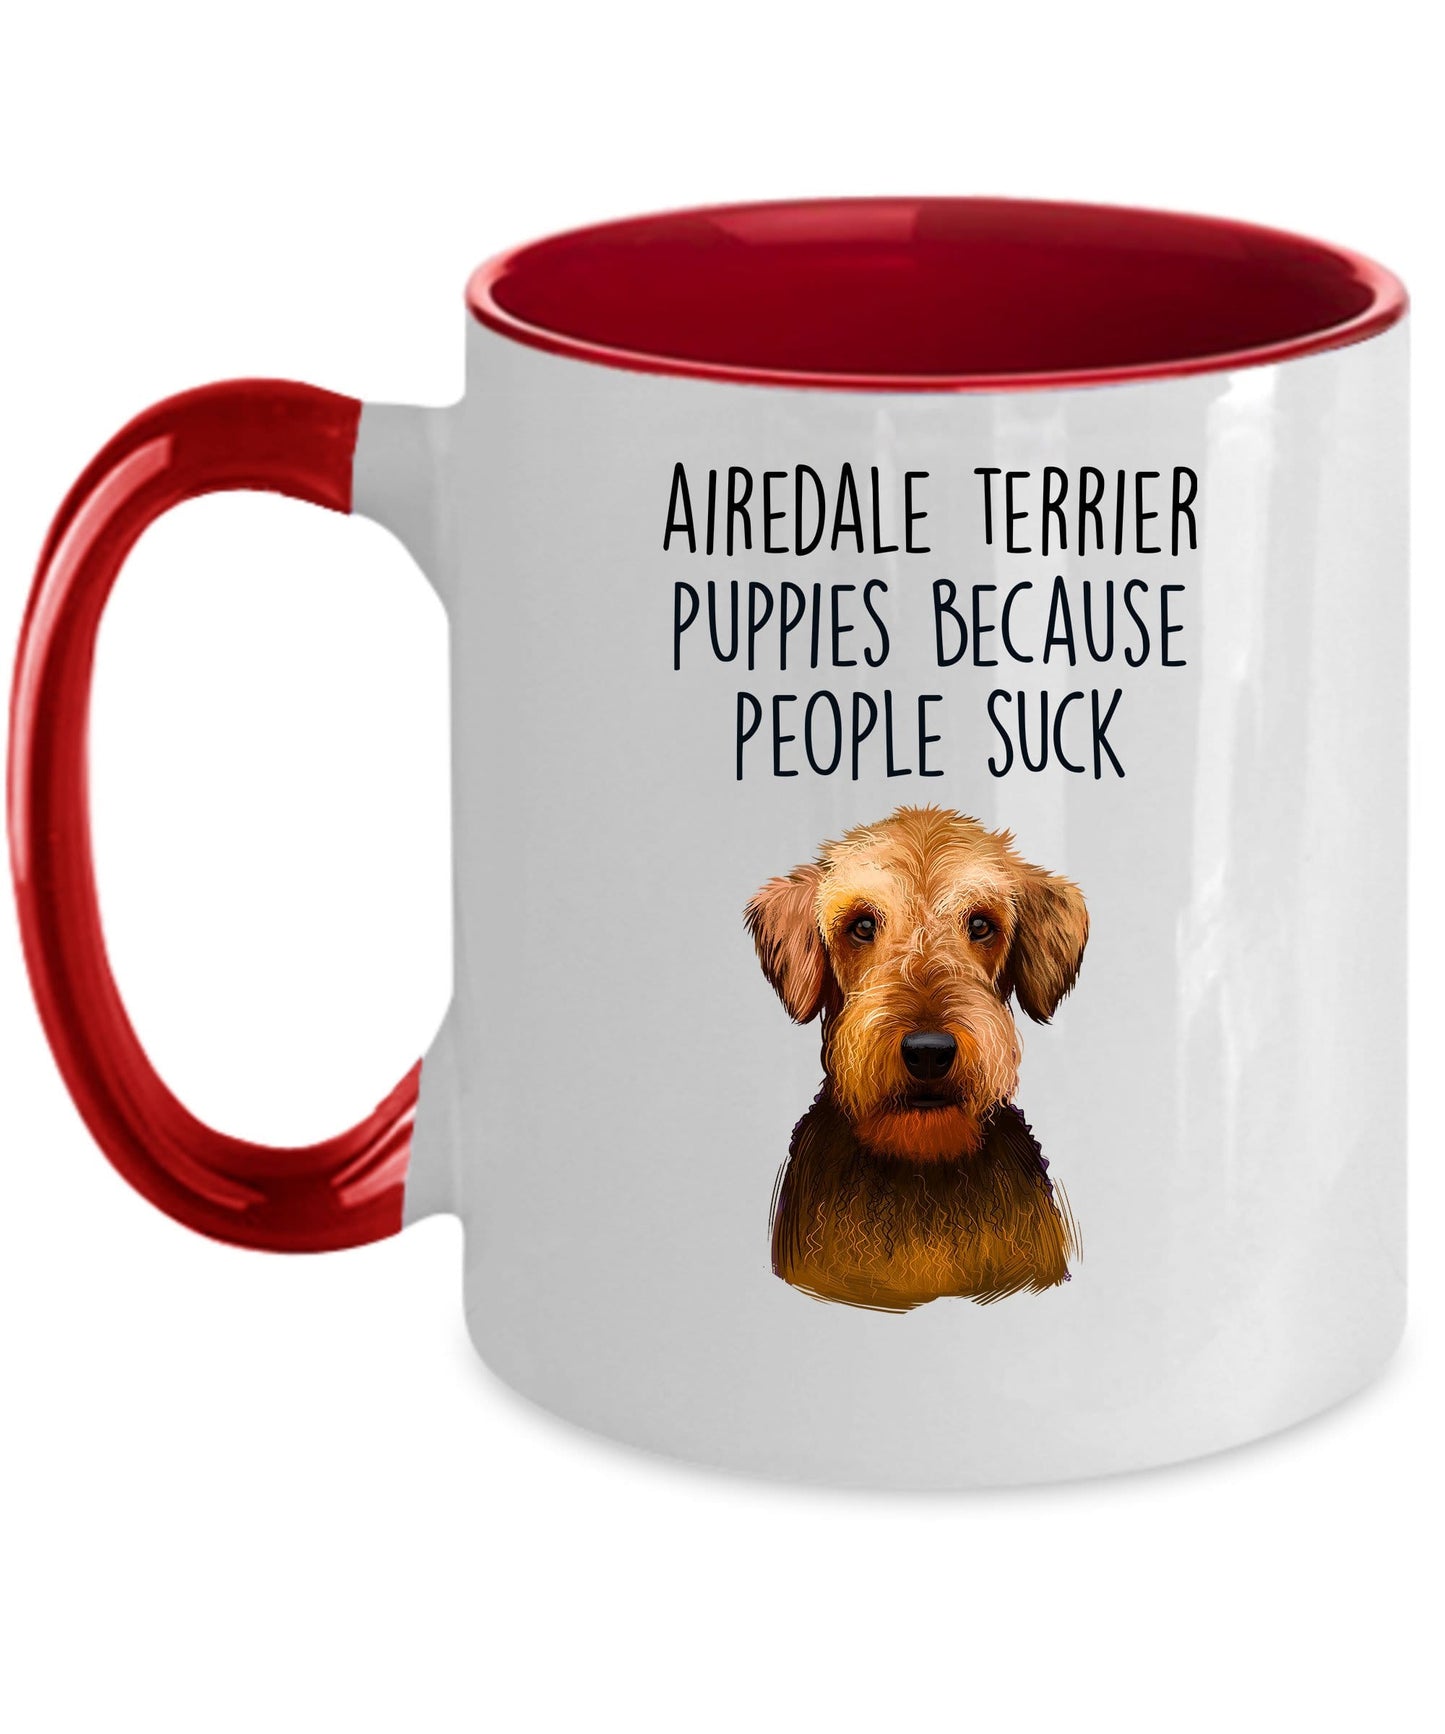 Airedale Terrier Puppies Because People Suck - Funny Dog Ceramic Mug